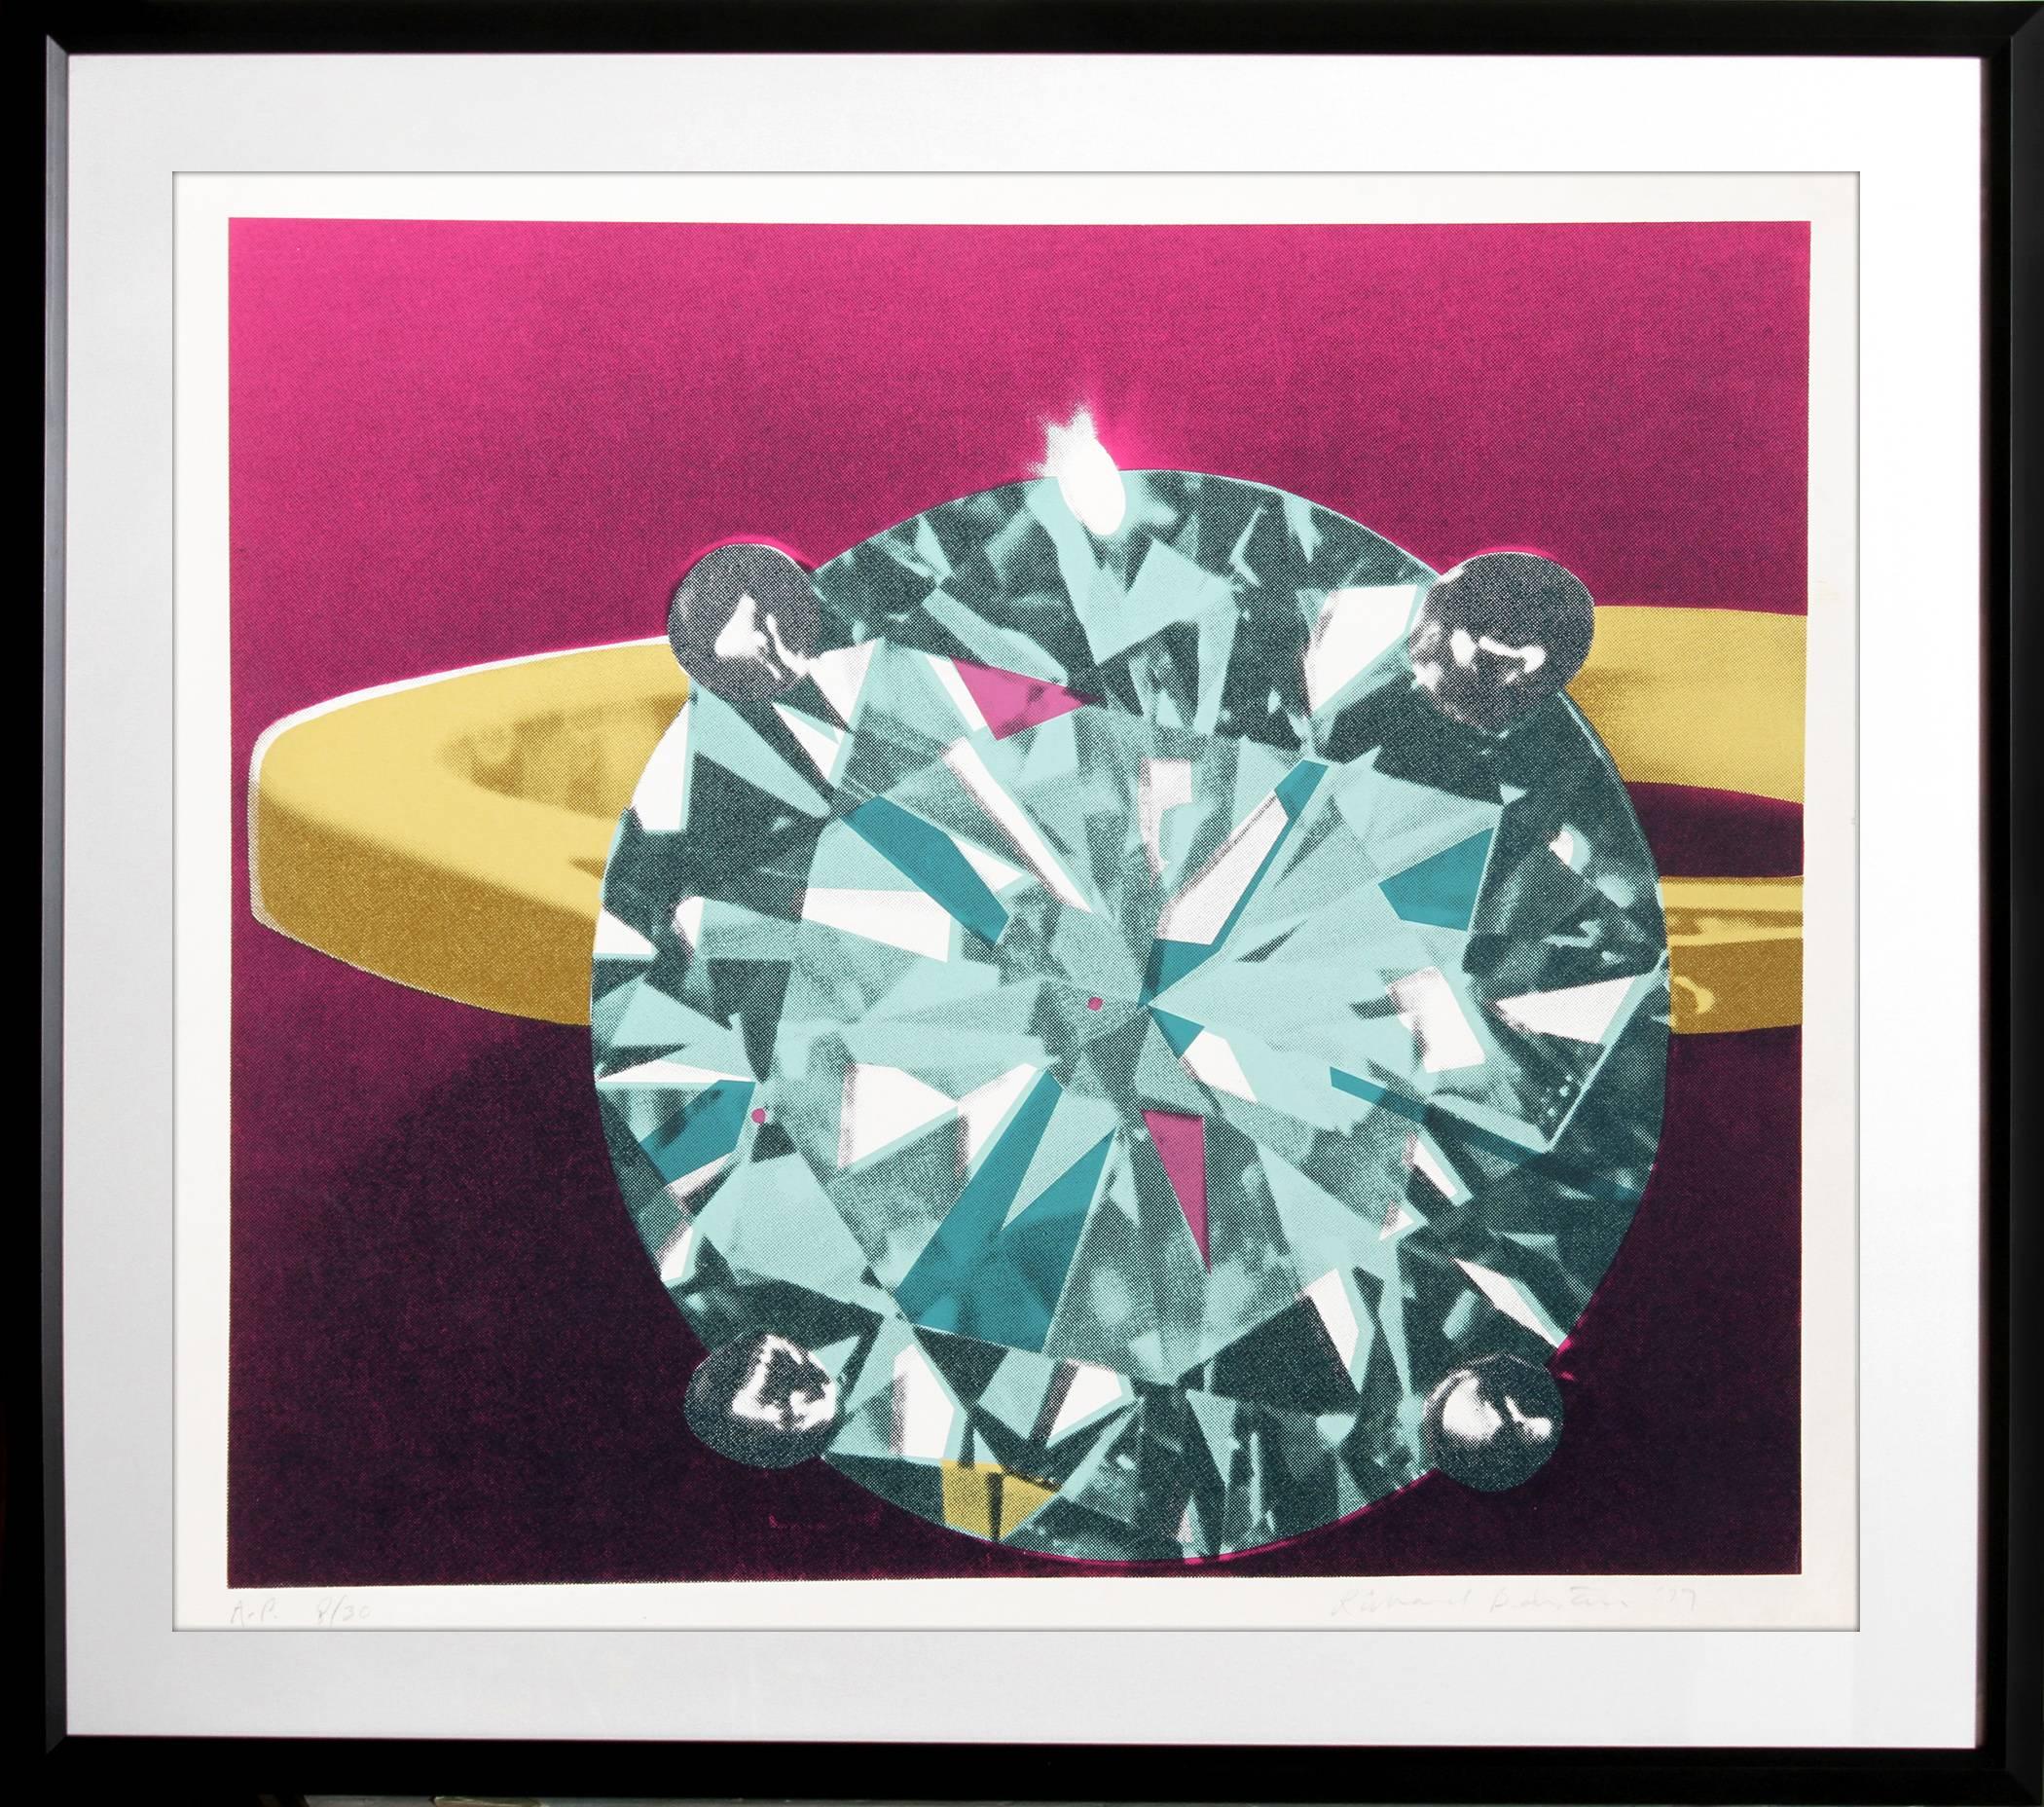 Artist: Richard Bernstein
Title: Diamond
Year: 1978
Medium: Silkscreen, signed and numbered in pencil
Edition: 200, AP 30
Size: 26 in. x 30.5 in. (66.04 cm x 77.47 cm)
Frame Size: 32.5 x 36.5 inches